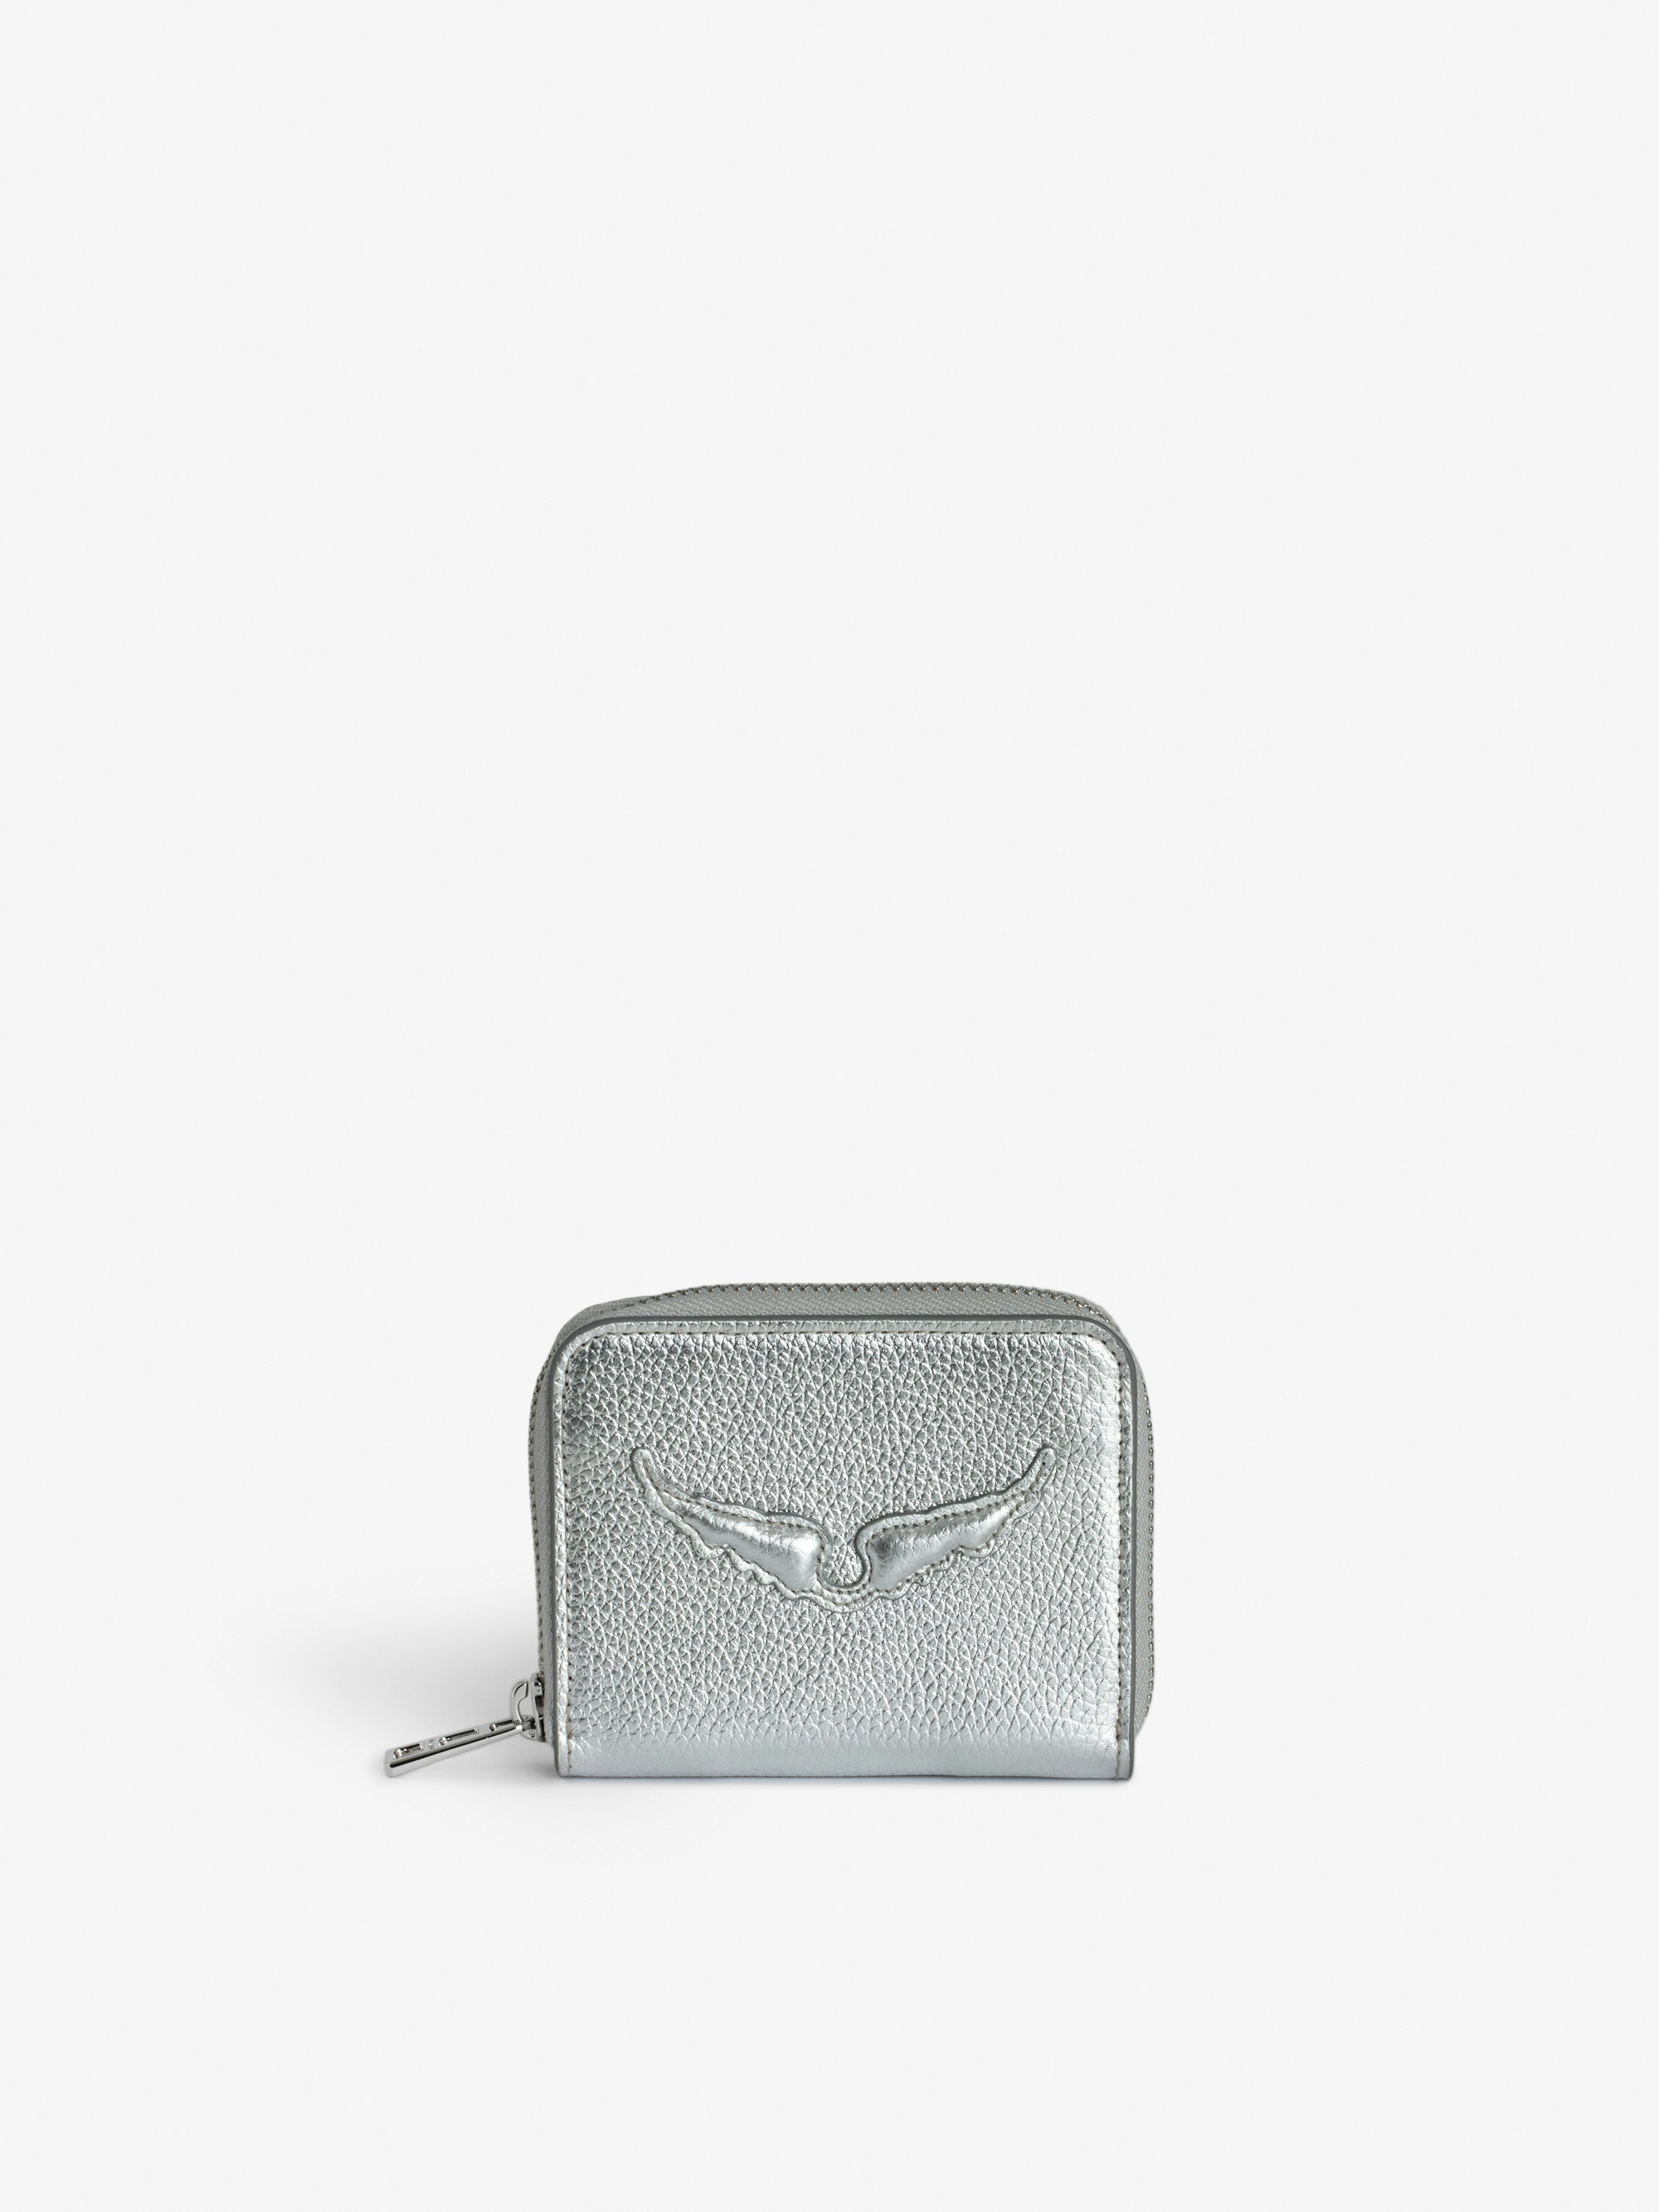 Mini ZV Coin Purse - Coin purse in silver metallic grained leather with embossed wings signature.